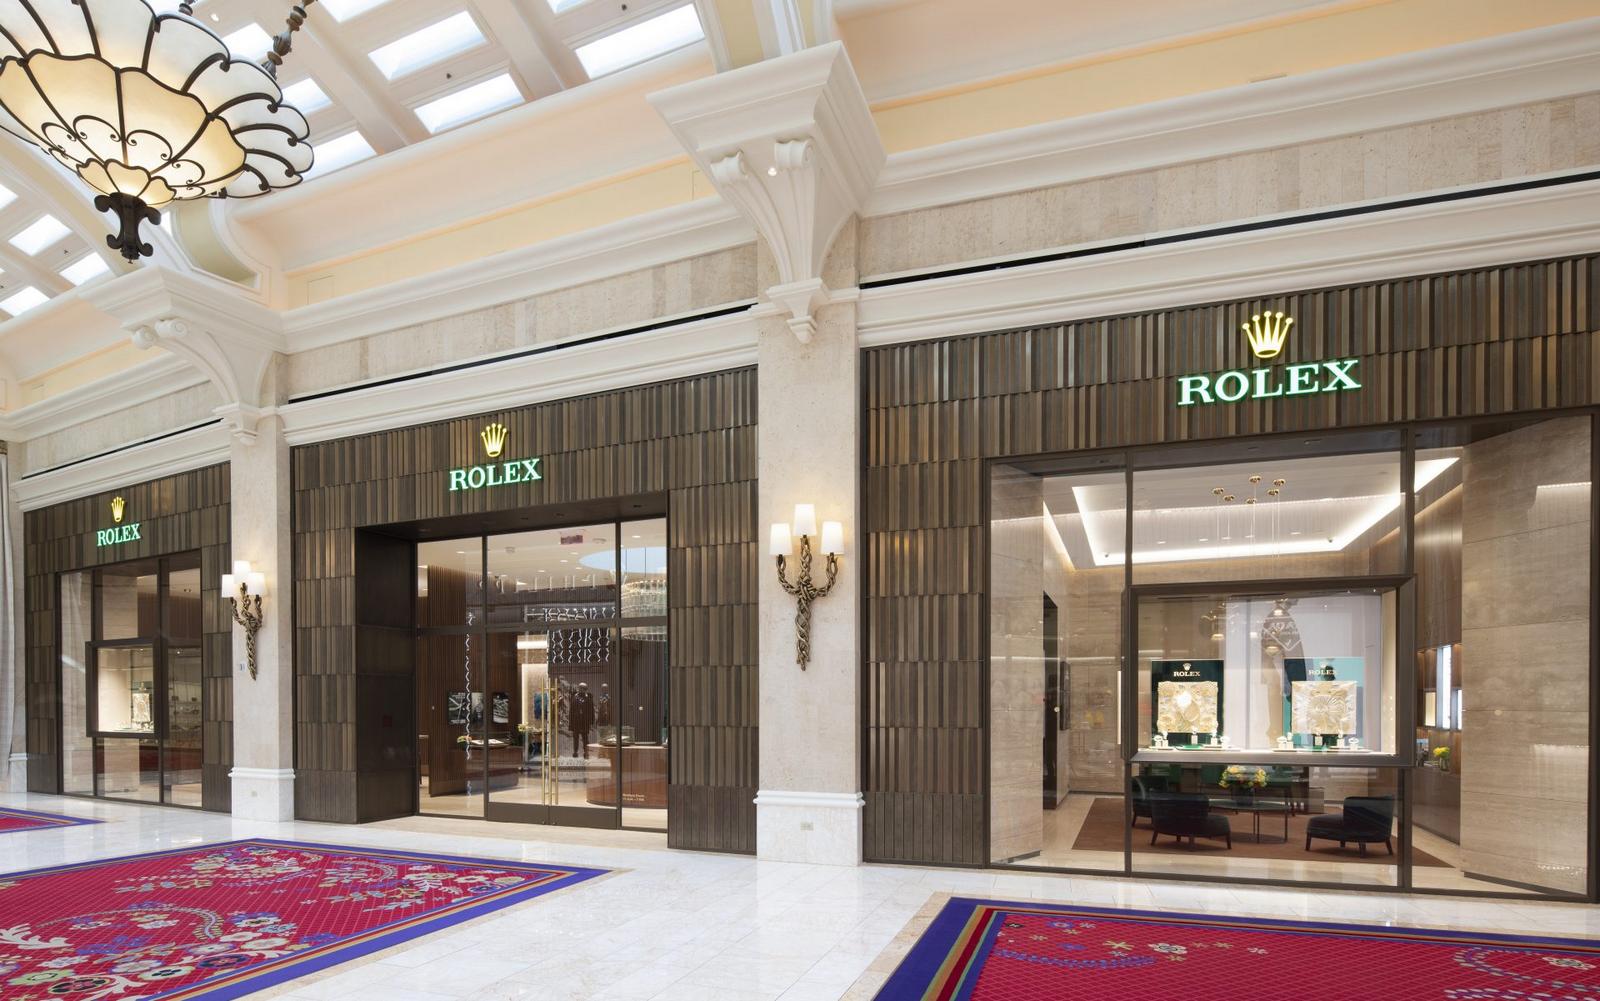 The largest Rolex showroom in America has just opened in Las Vegas (your chances of getting a Daytona are still slim)